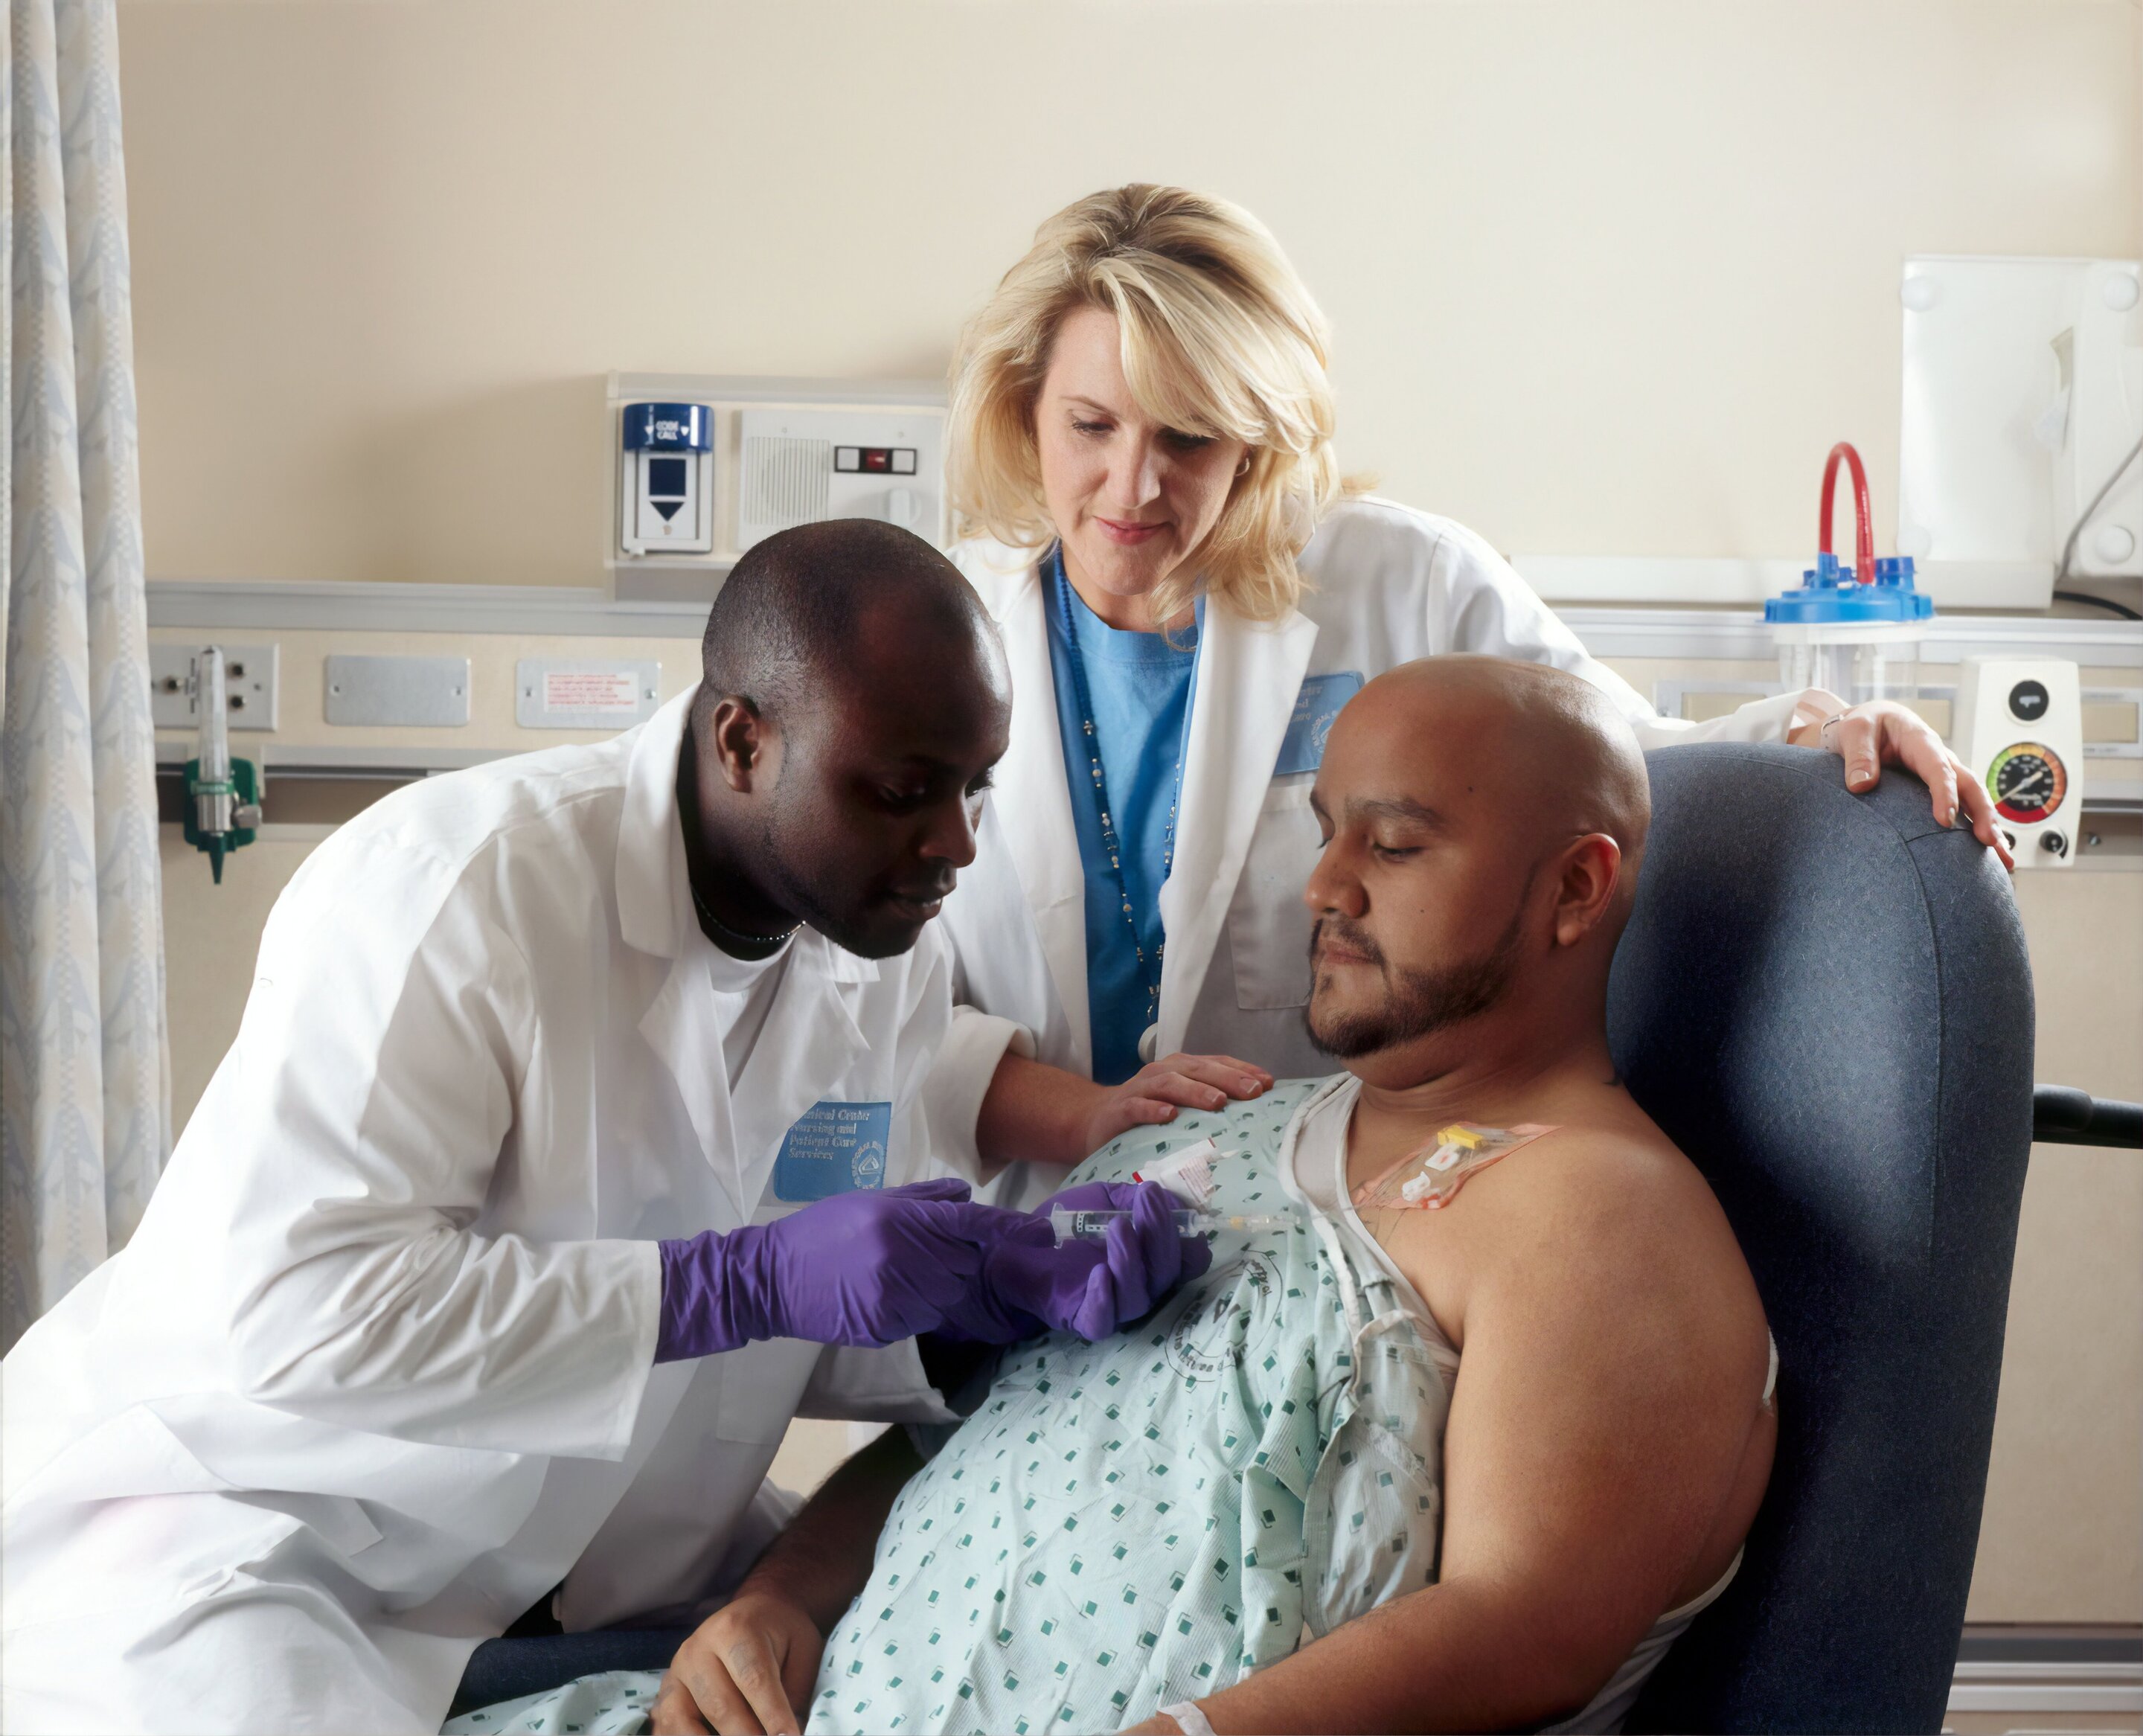 New Cancer Patients, Especially Blacks, at Greater Risk for COVID